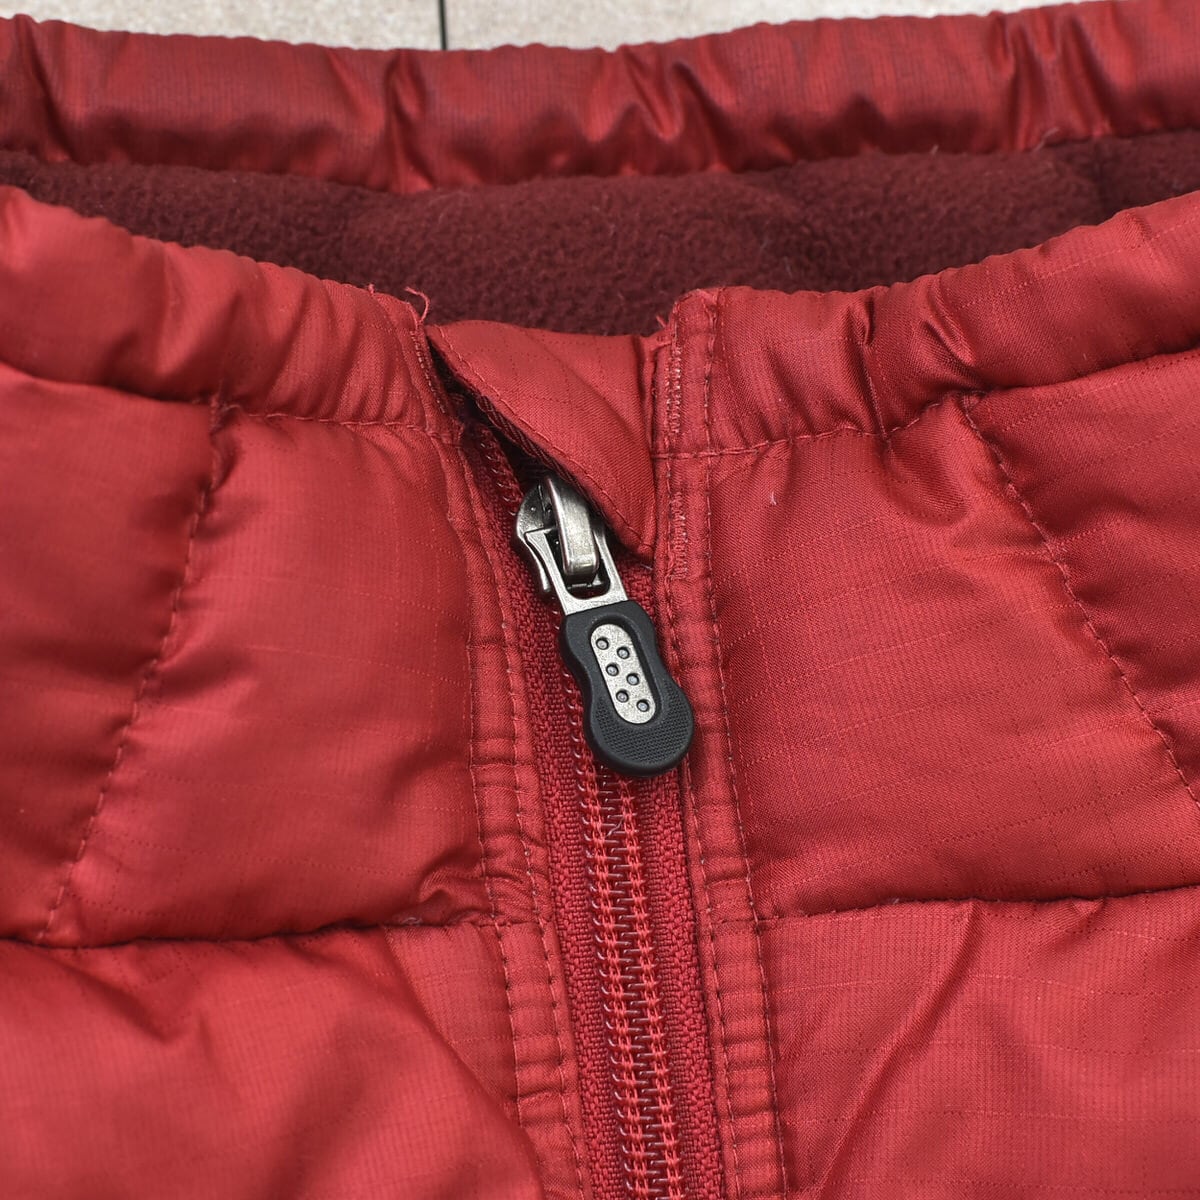 patagonia F7 big size down jacket | 古着屋 grin days memory 【公式